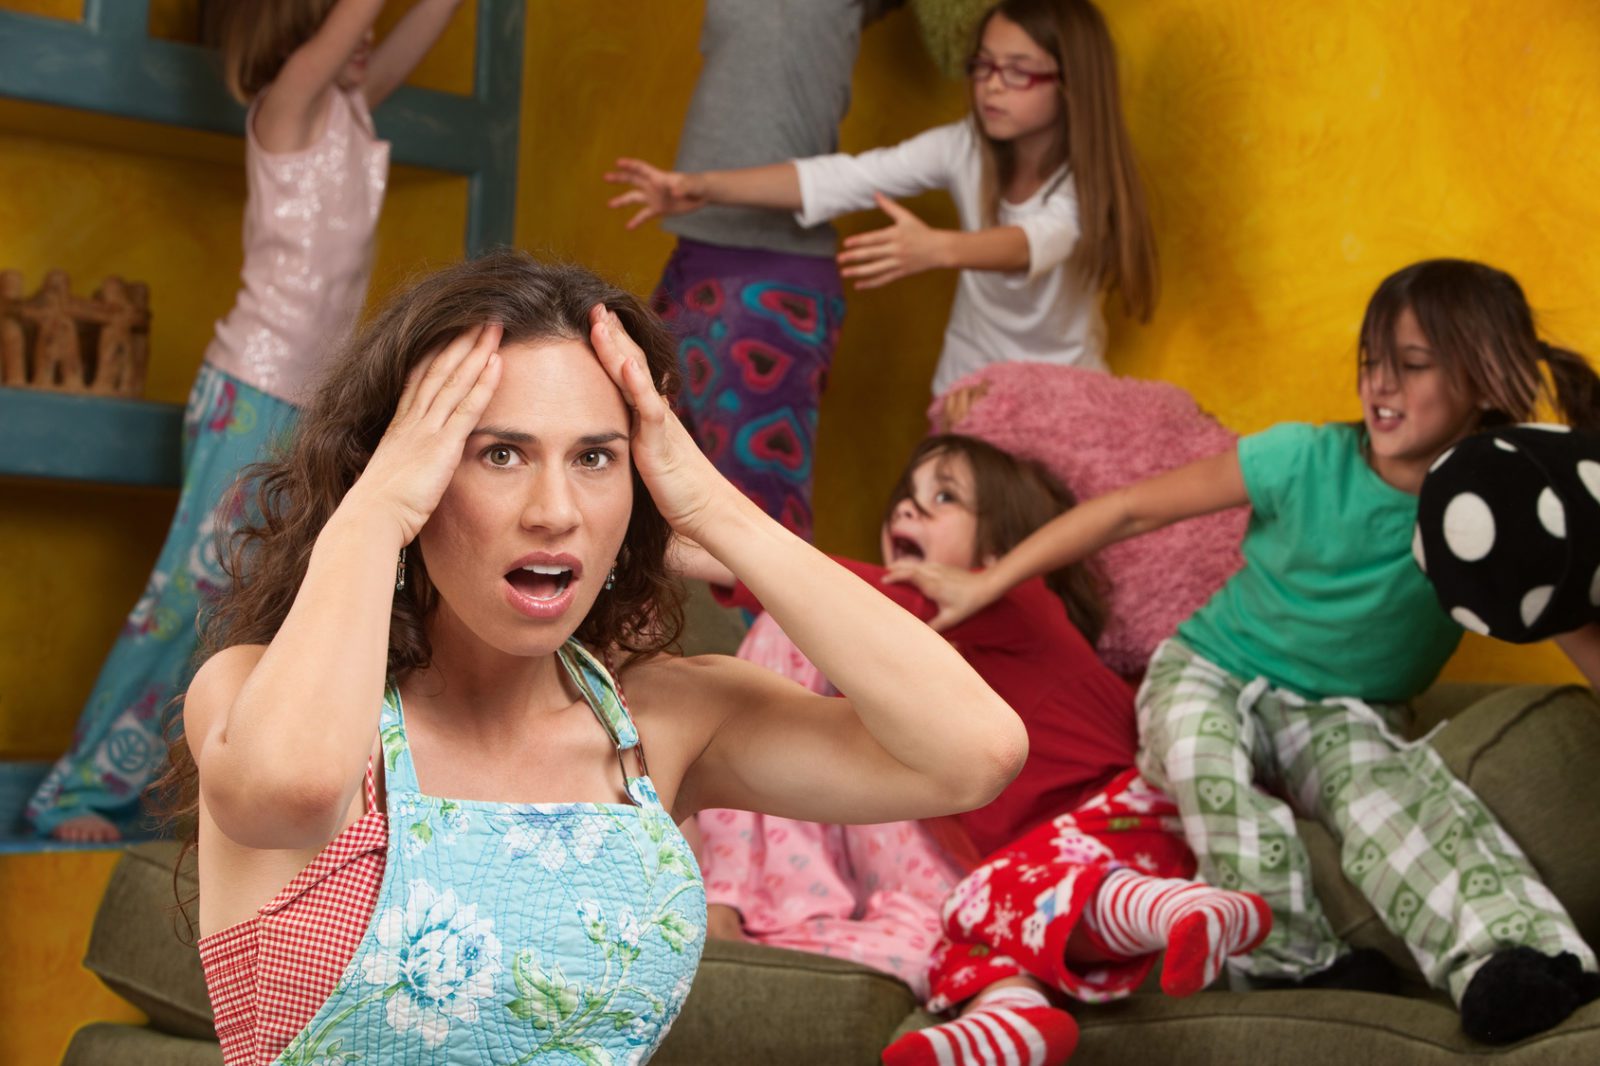 Study: The Statistics of a “Chaotic” Household